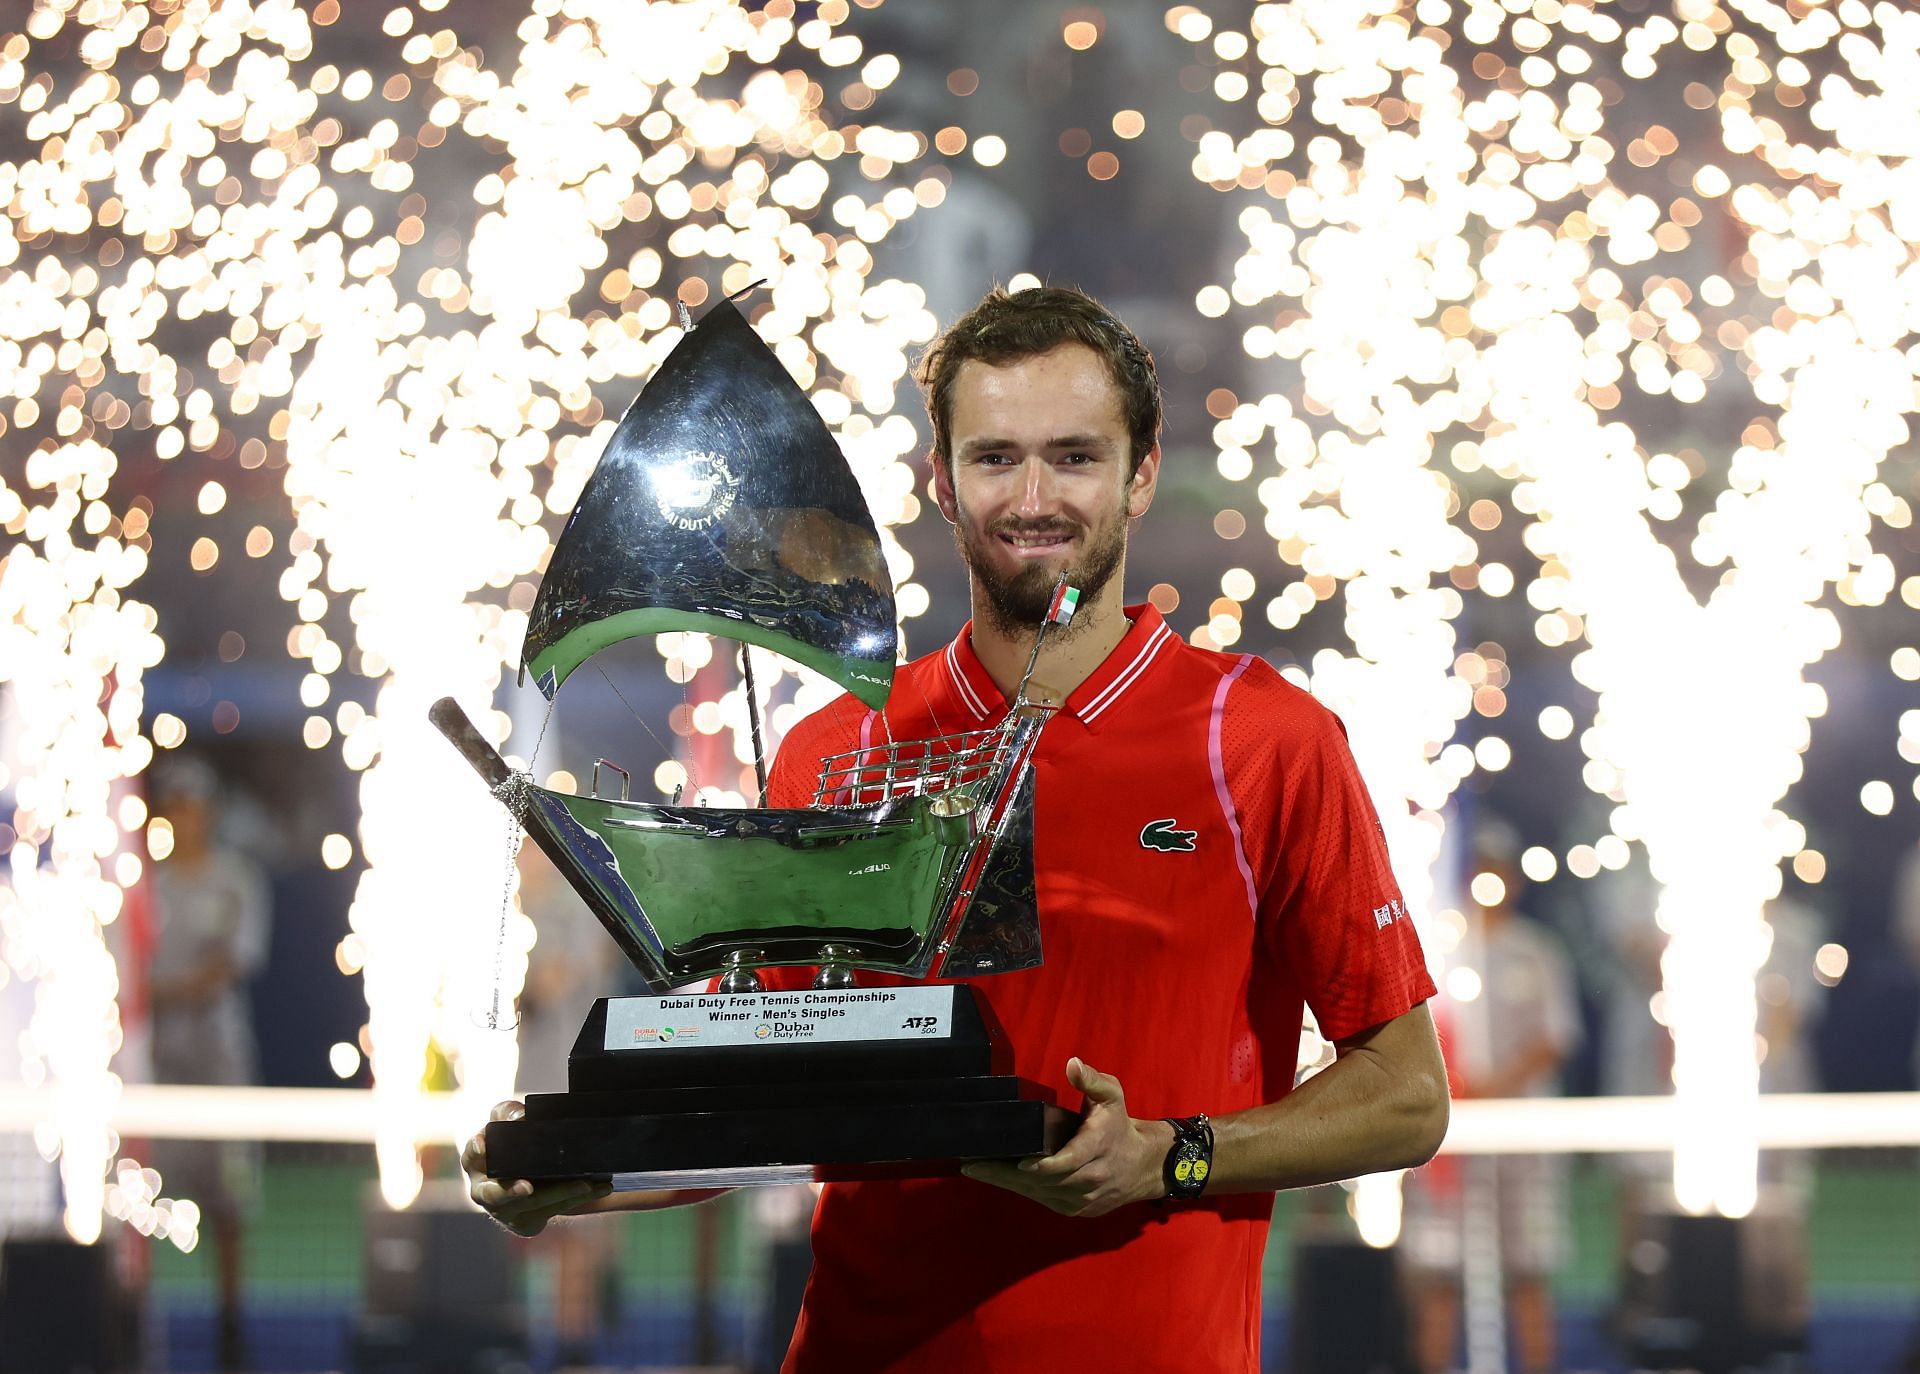 Daniil Medvedev enters Indian Wells on the back of three consecutive titles, including Dubai.